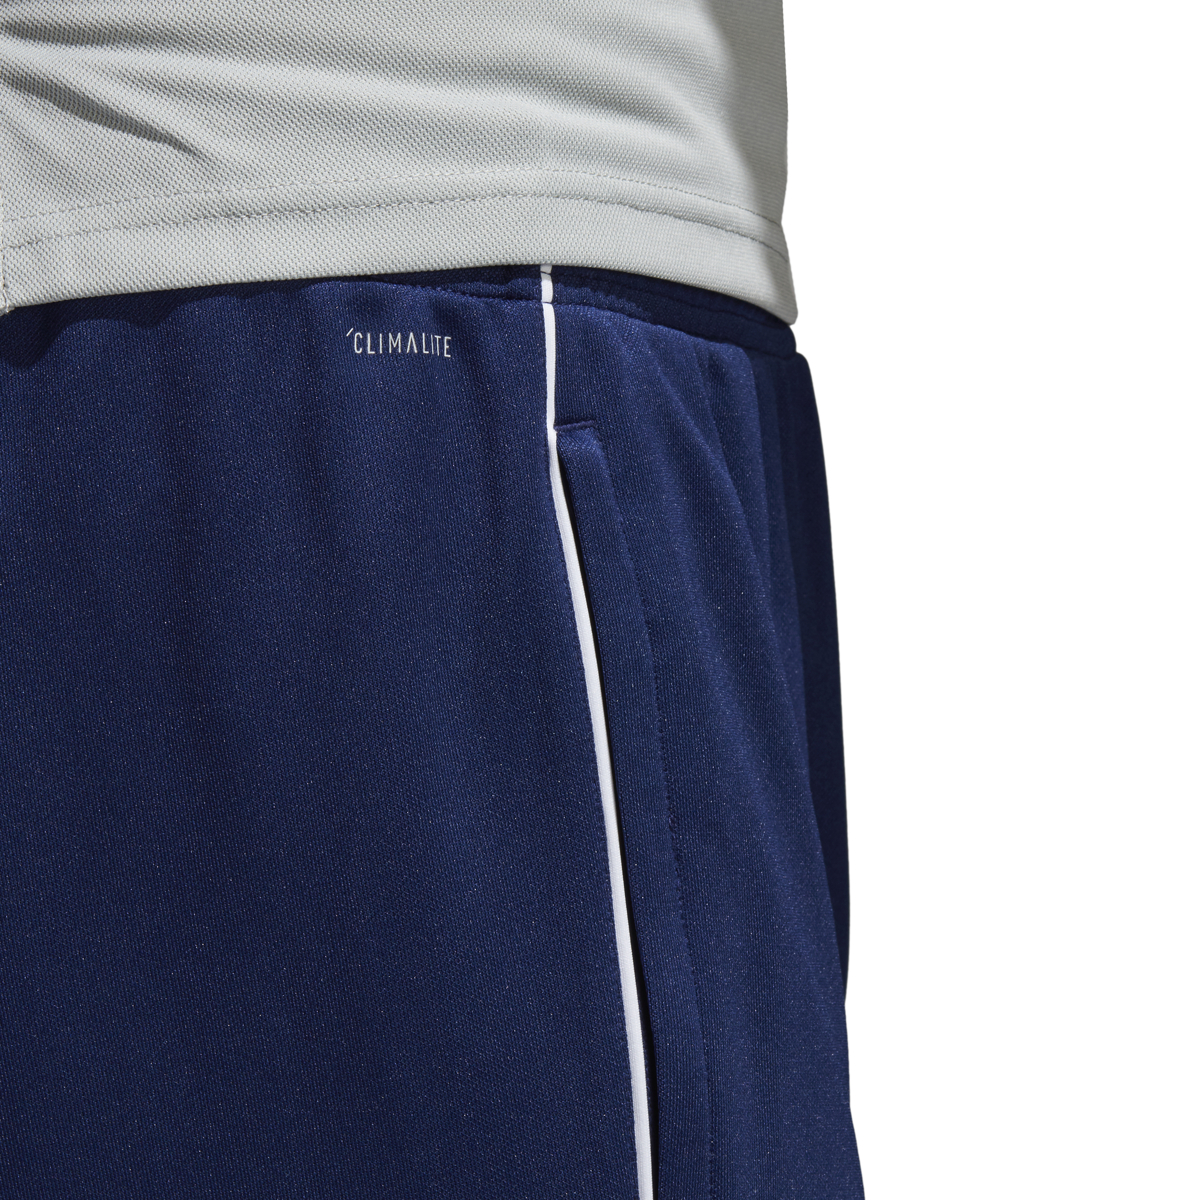 Adidas Men's Soccer Core 18 Training Pants Adidas - Ships Directly From Adidas - image 5 of 5